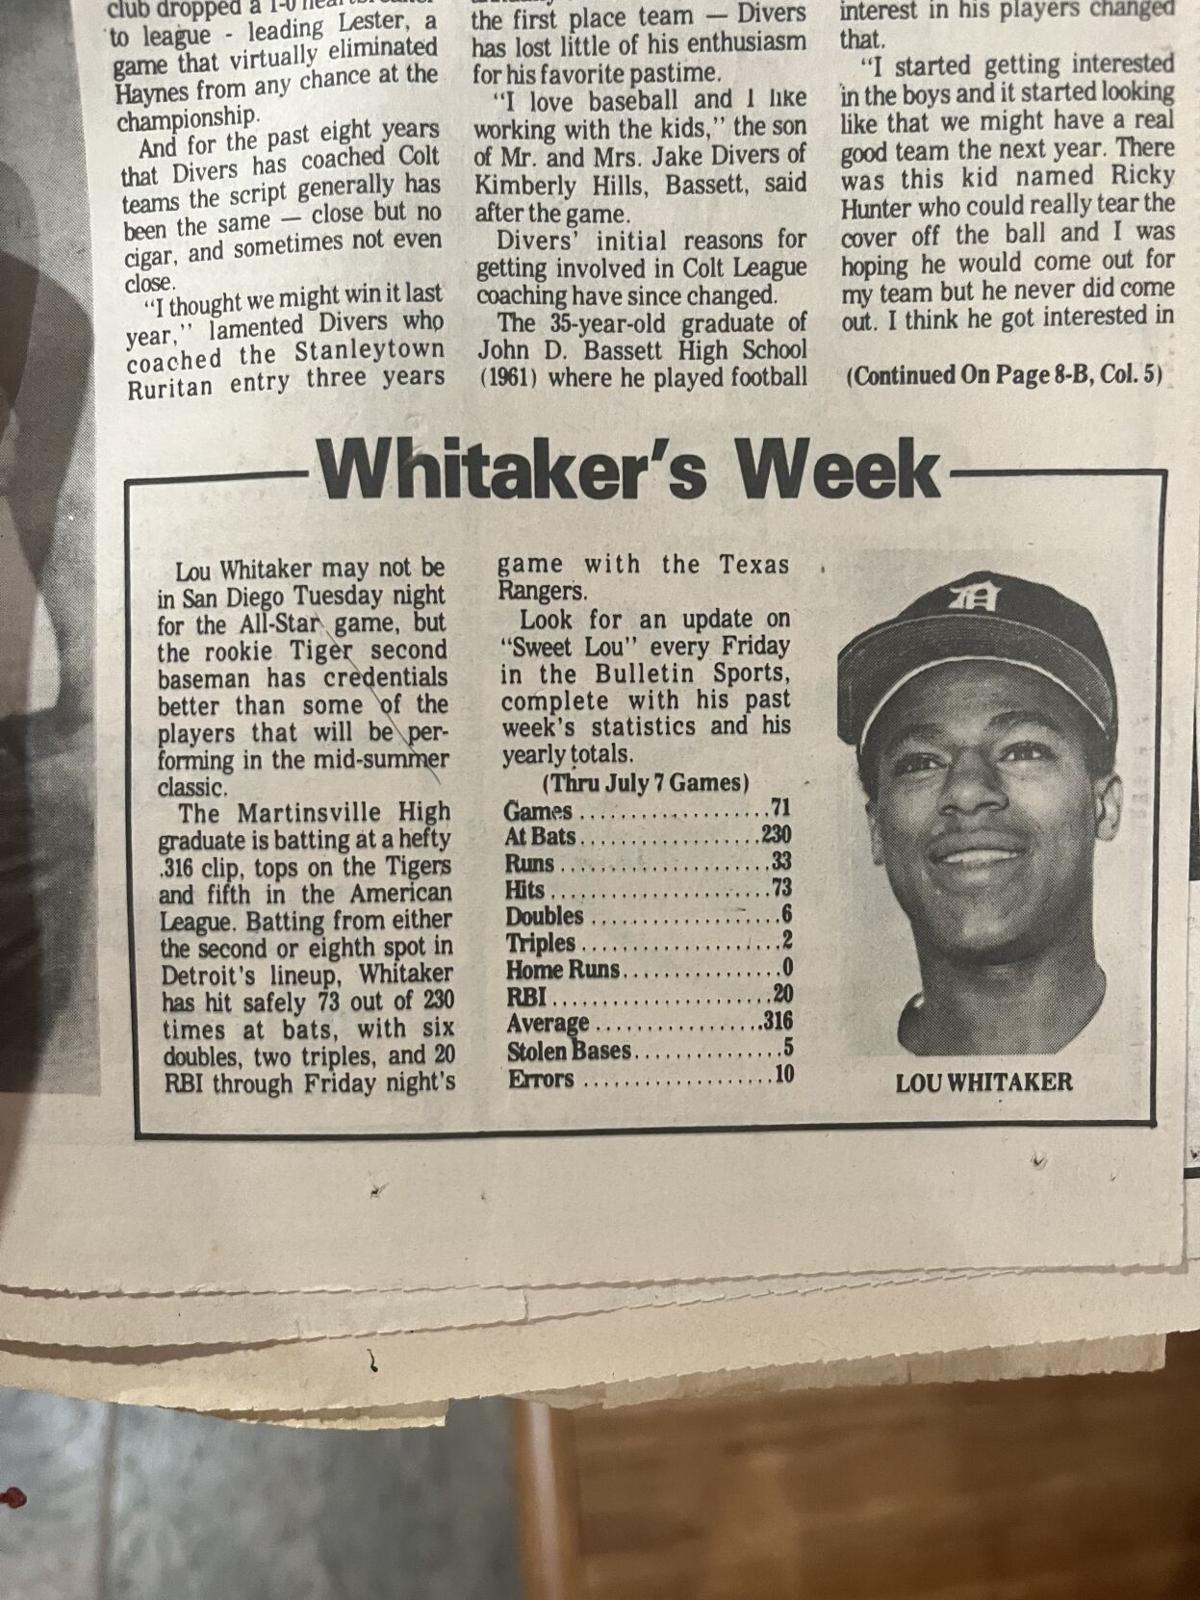 Alan Trammell and Lou Whitaker's numbers should be retired - Bless